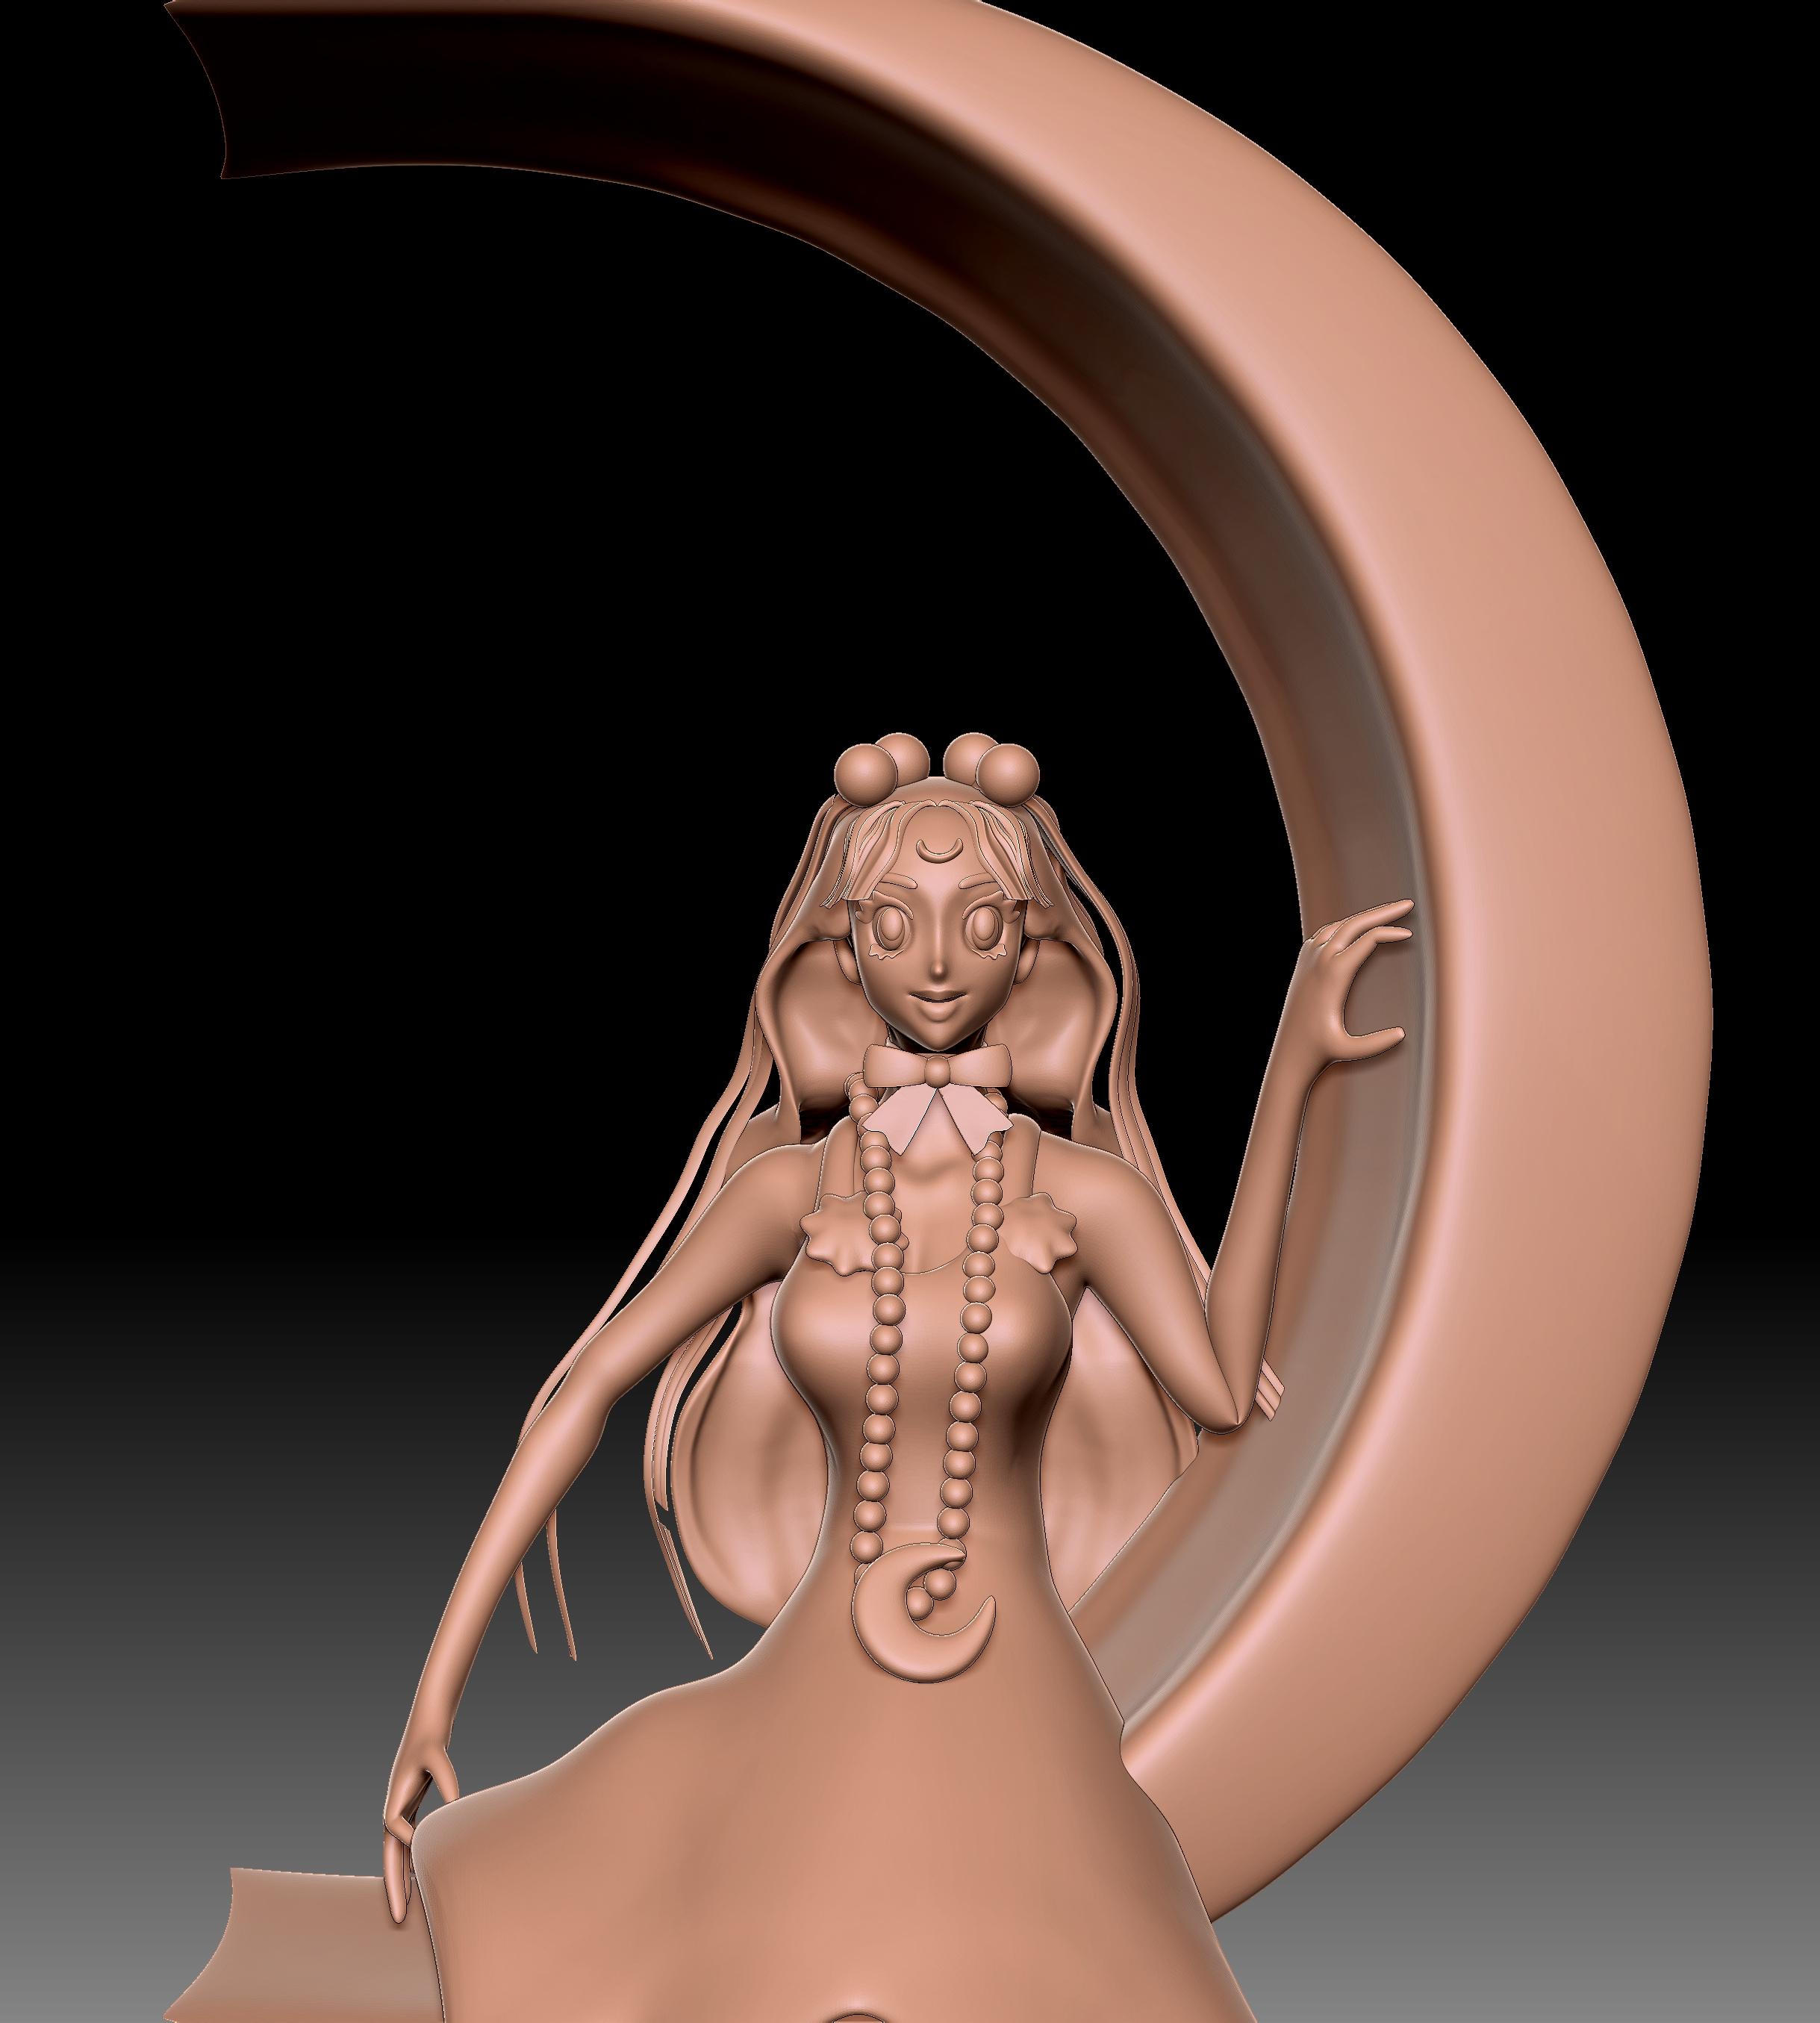 GamerSupps Waifu Cup Stand with LED Channels - 3D model by grumpymonkeyuk  on Thangs